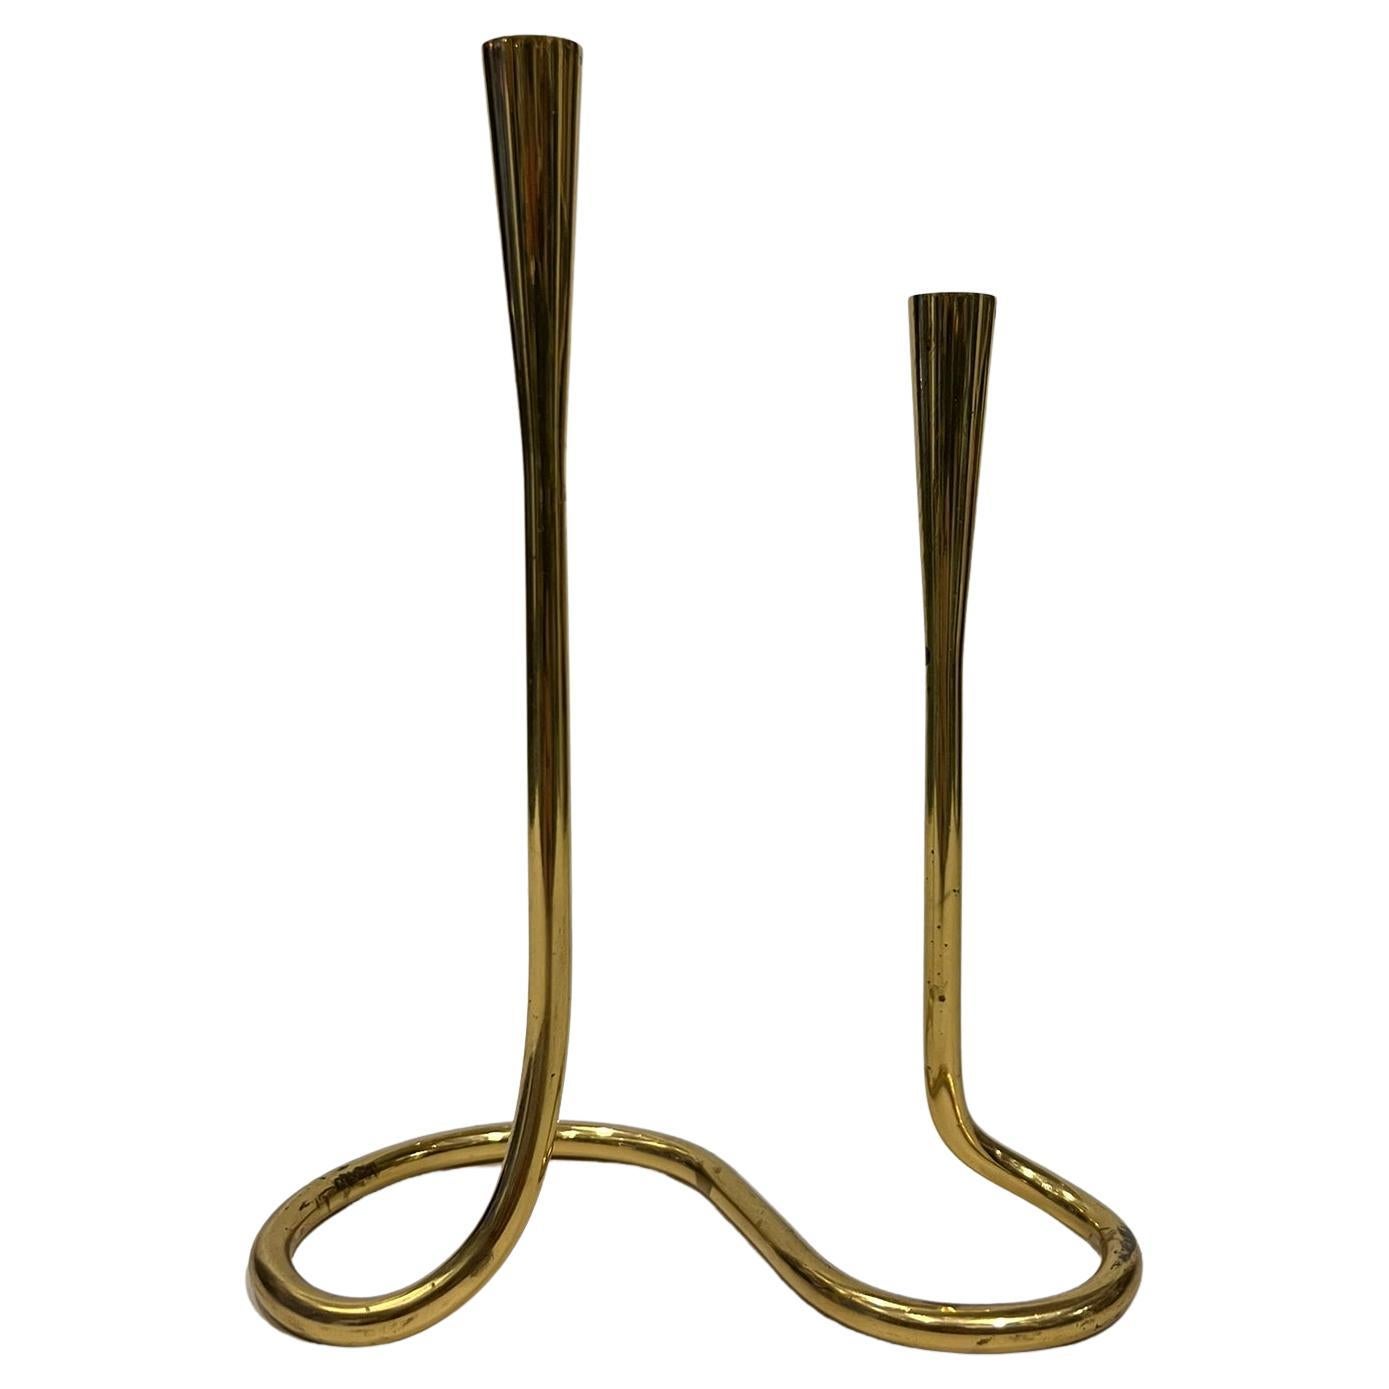 Serpentine brass candlestick for Illums Bolighus 1960s, after Danish design, produced in Germany.